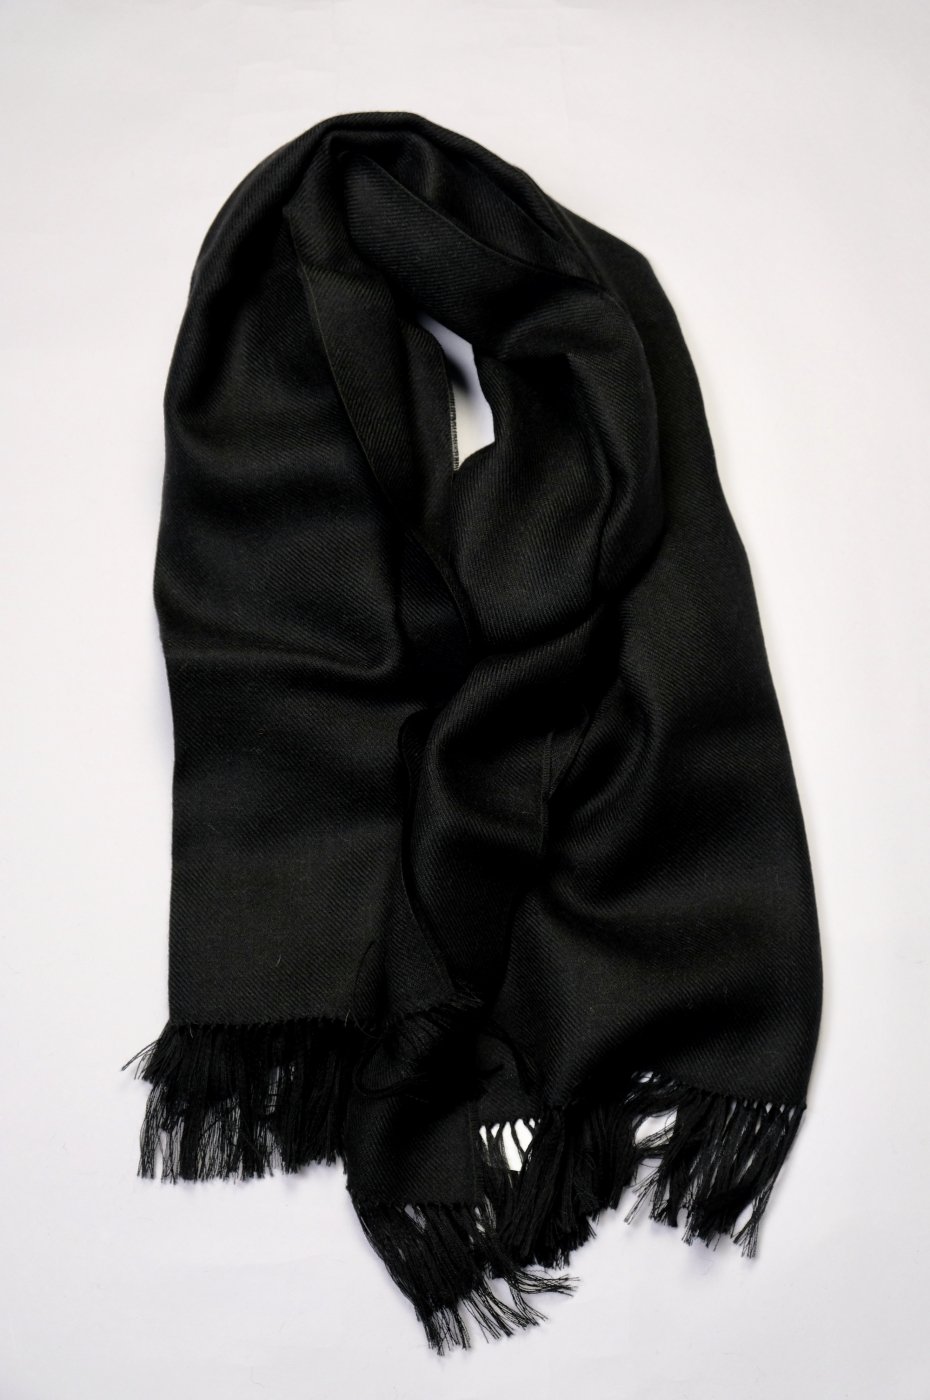 THE INOUE BROTHERS...ザ イノウエブラザーズ-NON BRUSHED LARGE STOLE-BLACK-